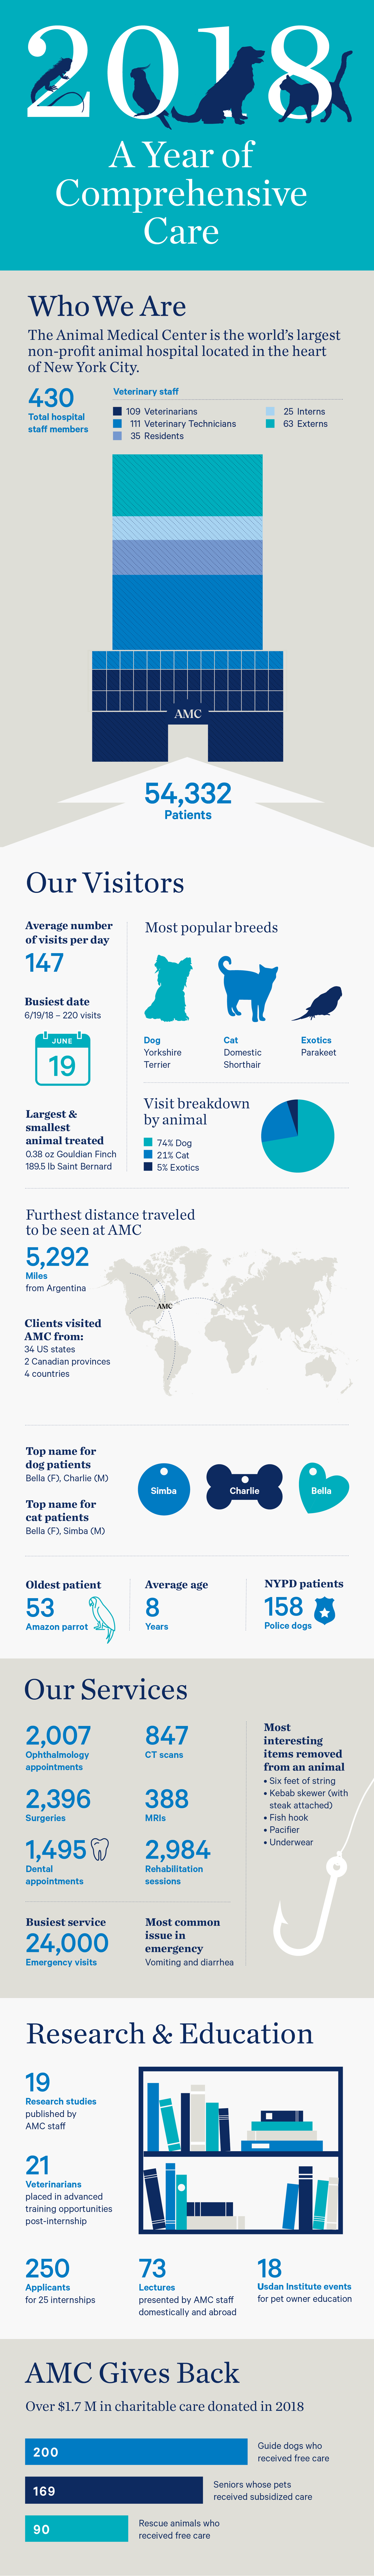 AMC's Year of Comprehensive Care report